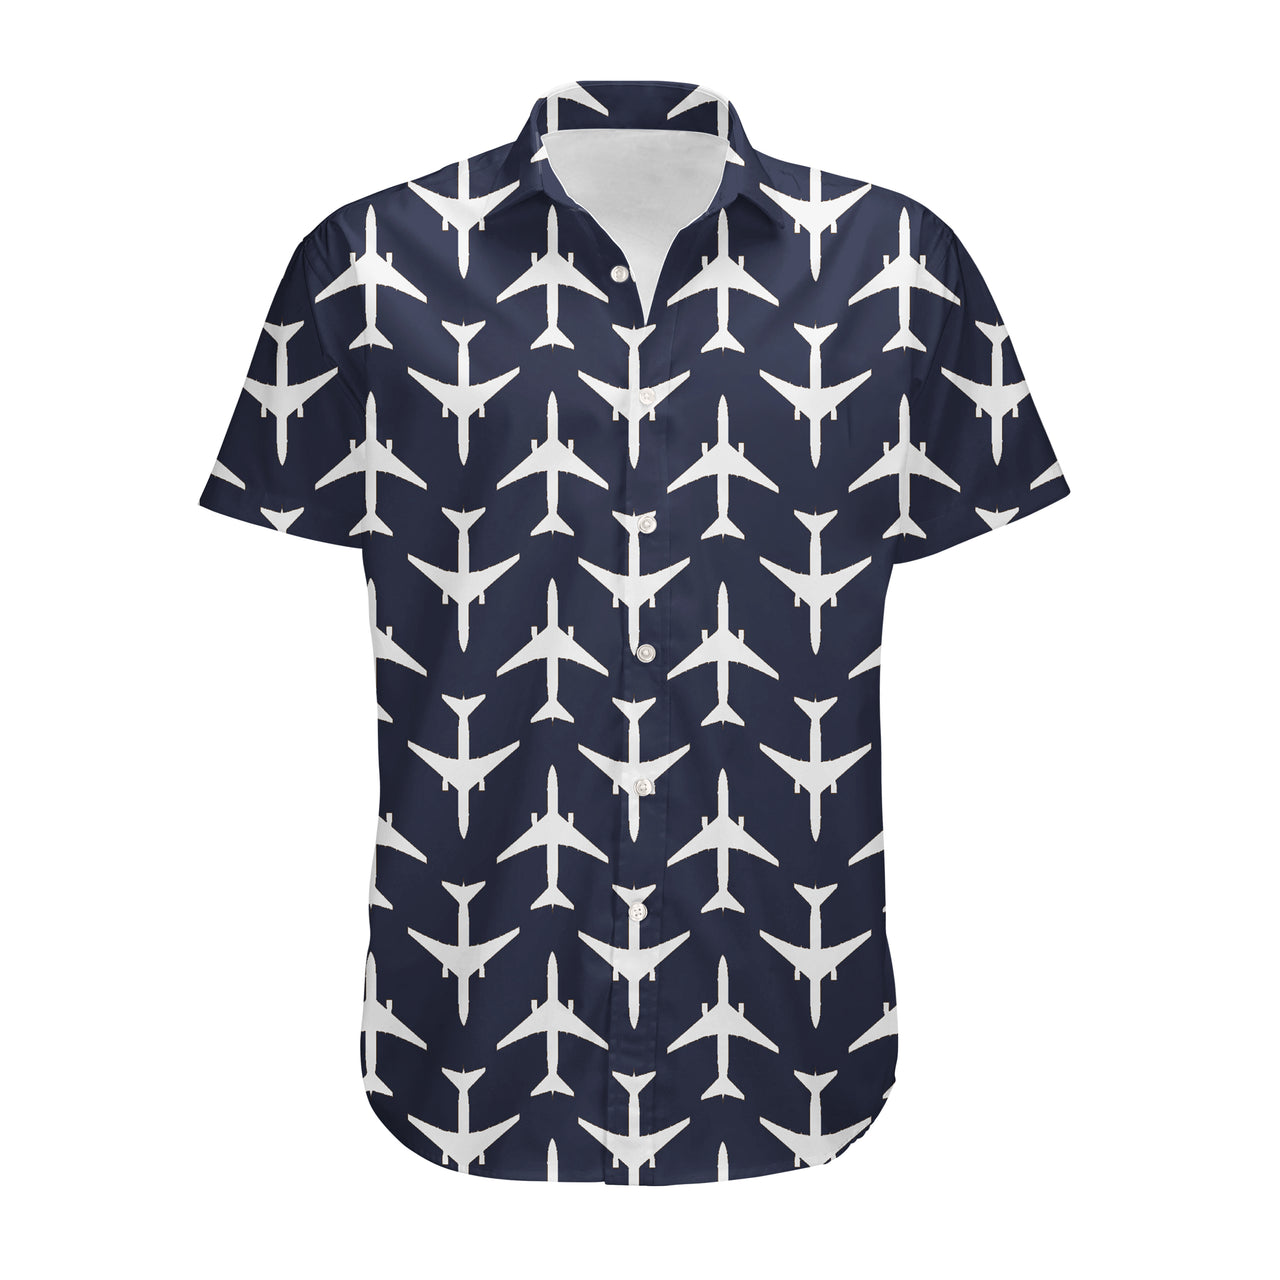 Perfectly Sized Seamless Airplanes Dark Blue Designed 3D Shirts